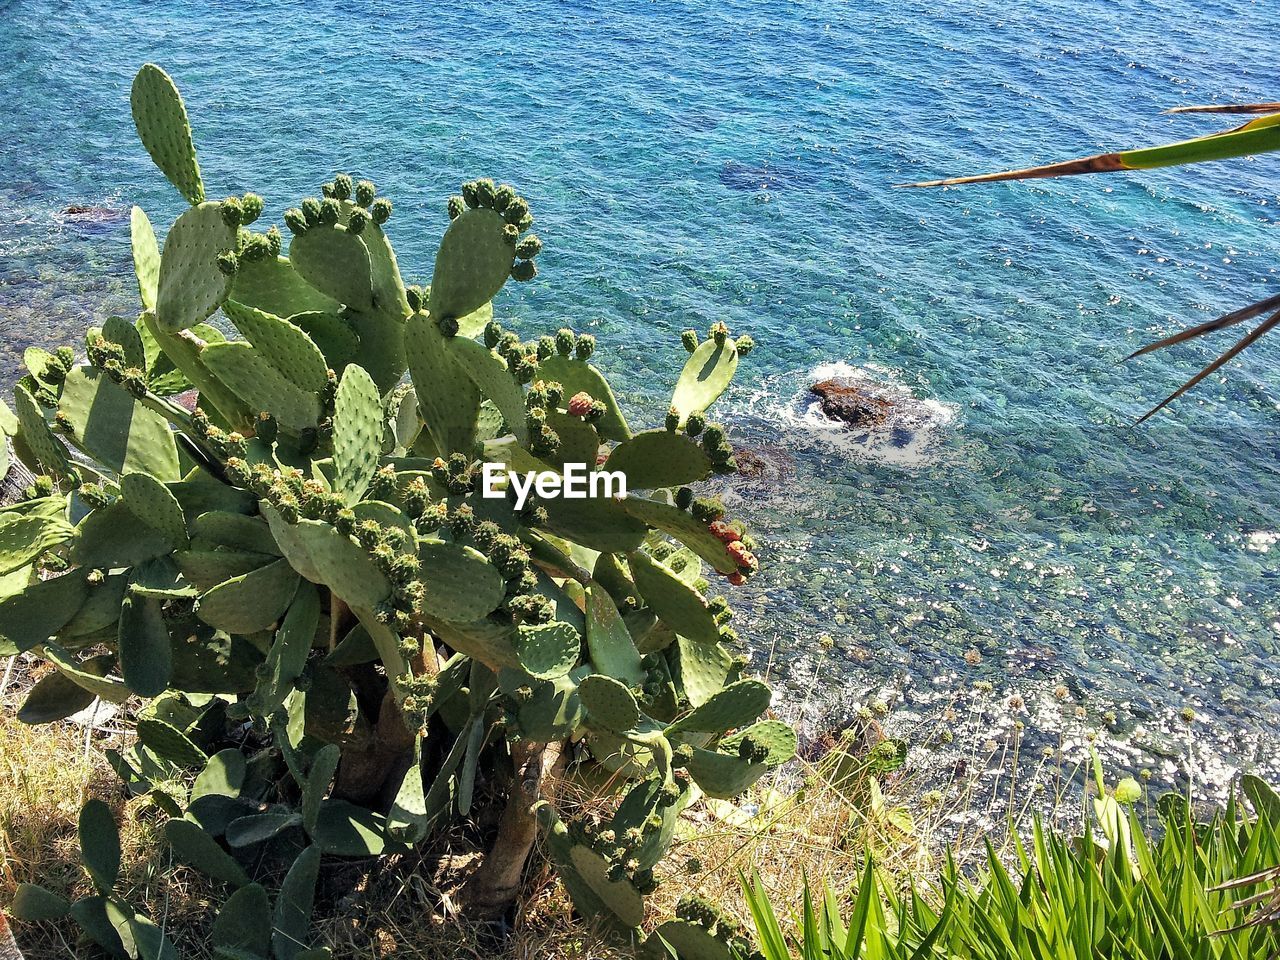 HIGH ANGLE VIEW OF SUCCULENT PLANTS GROWING ON SEA